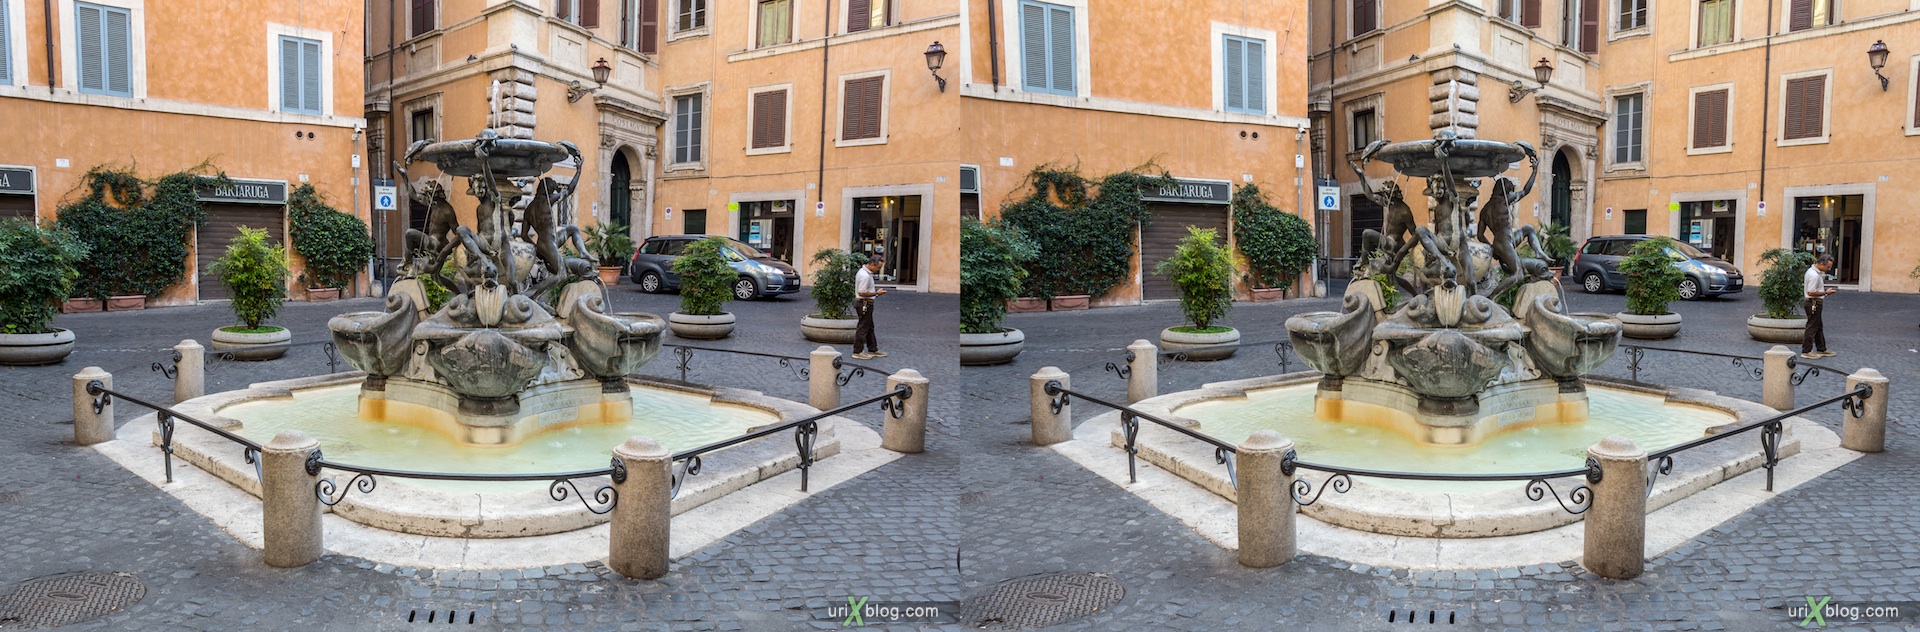 2012, Turtle fountain, Rome, Italy, 3D, stereo pair, cross-eyed, crossview, cross view stereo pair